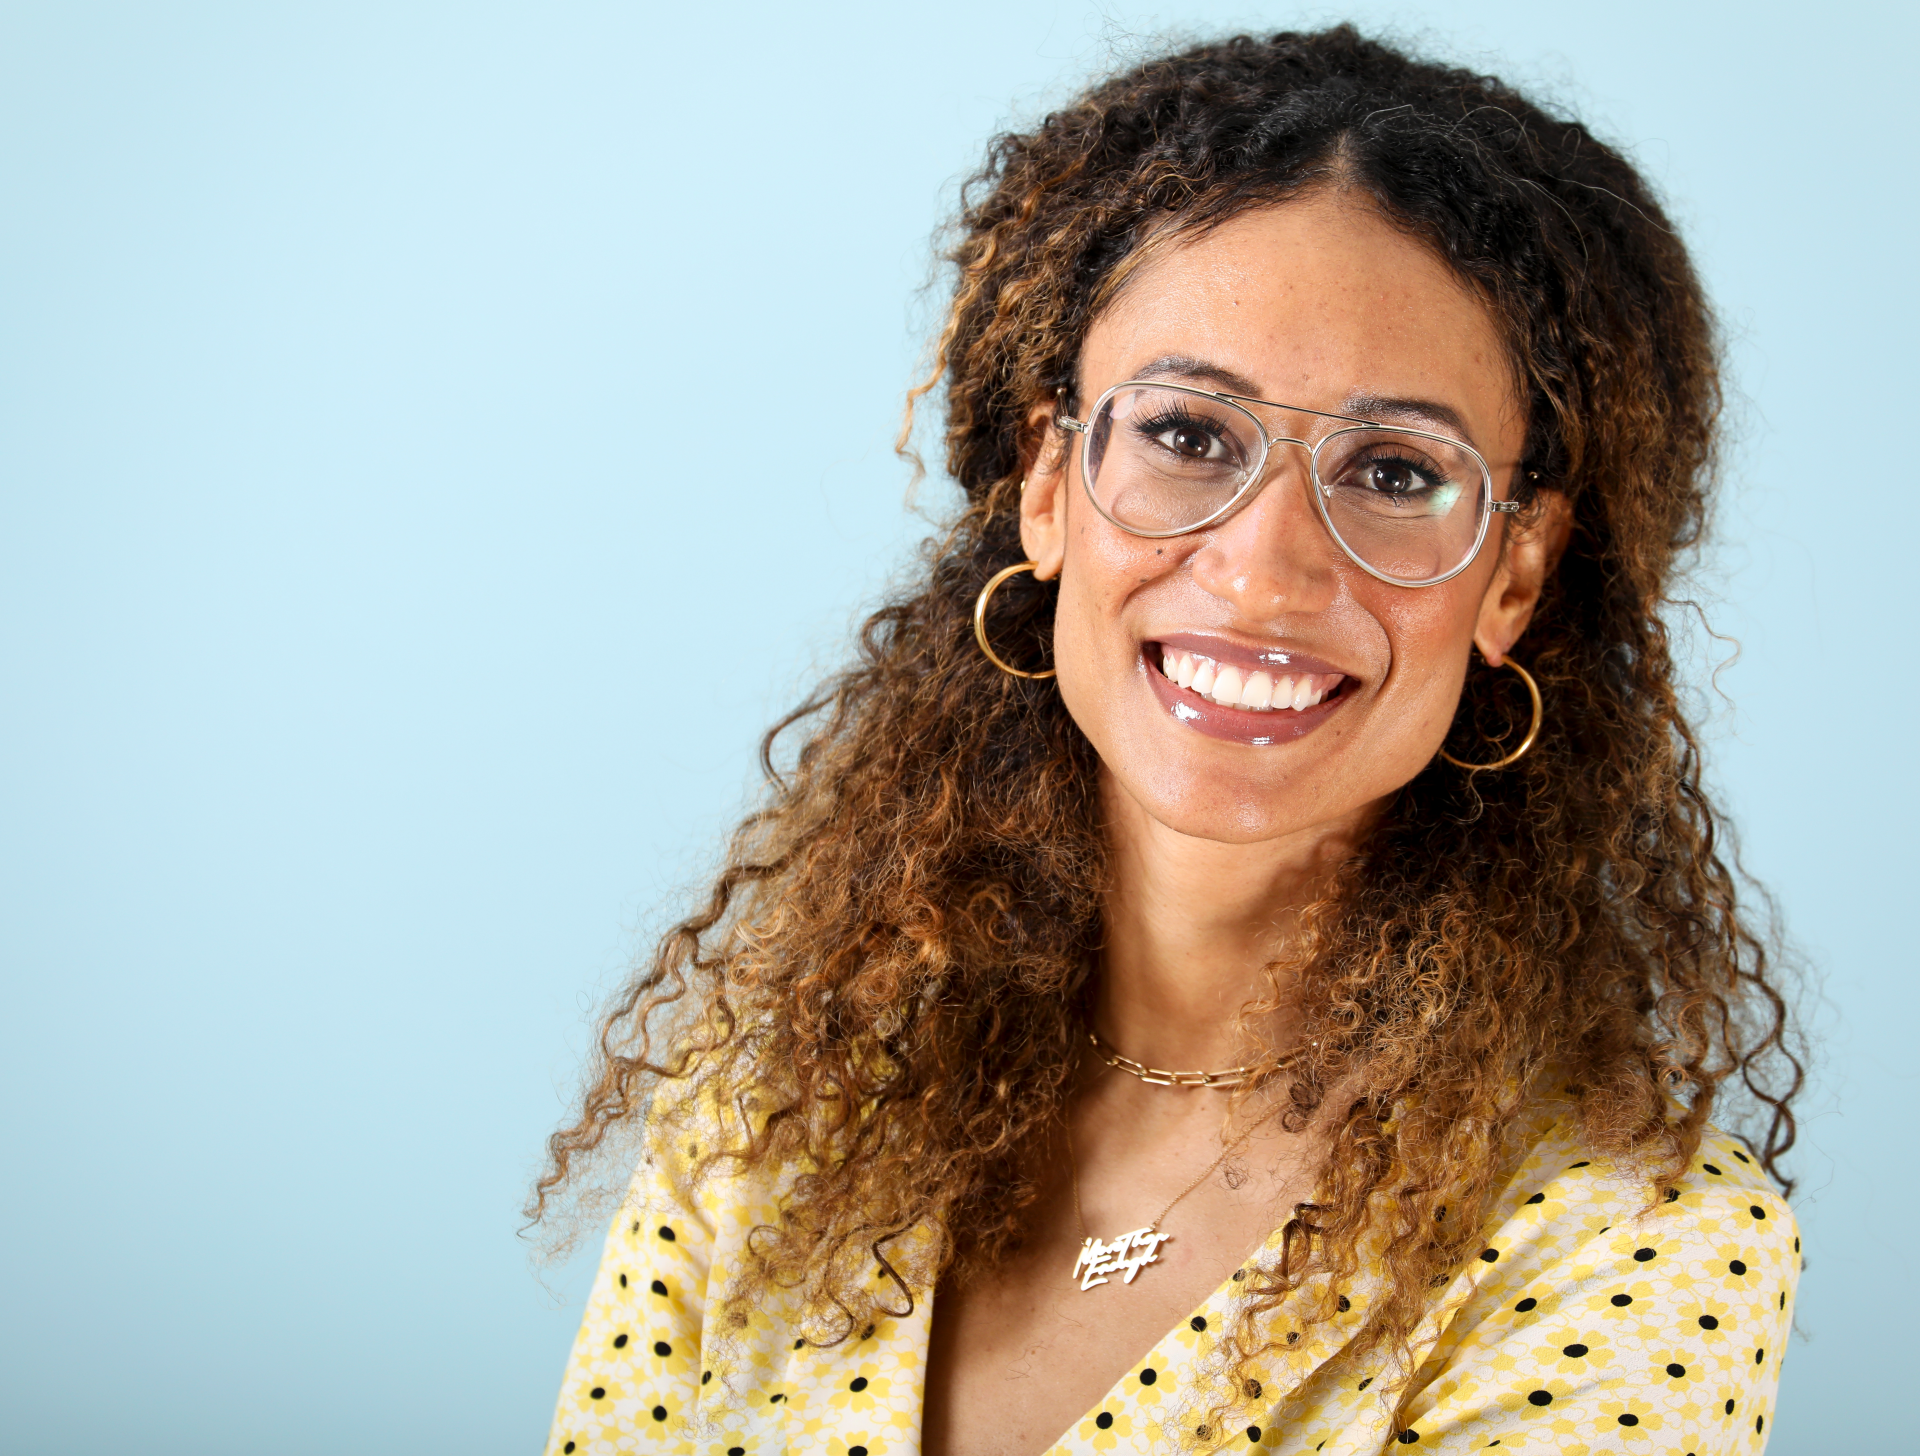 Race, power, drive: Elaine Welteroth shares all in new book.